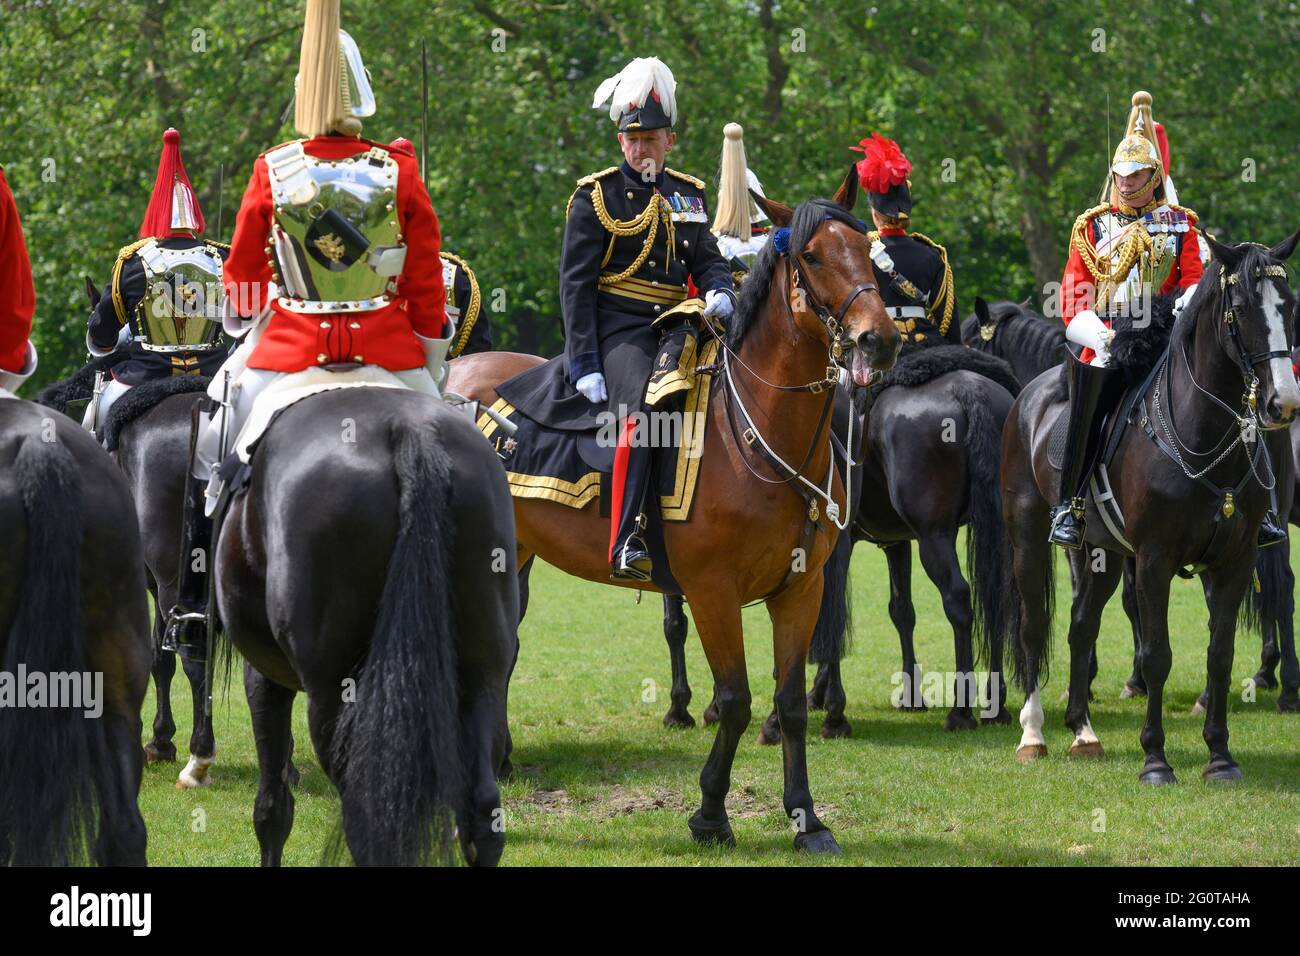 London, UK. 3 June 2021. 2021 Annual inspection of the Household Cavalry at Hyde Park by Major General Christopher John Ghika CBE the General Officer Commanding (pictured, white plume). Credit: Malcolm Park/Alamy Live News. Stock Photo